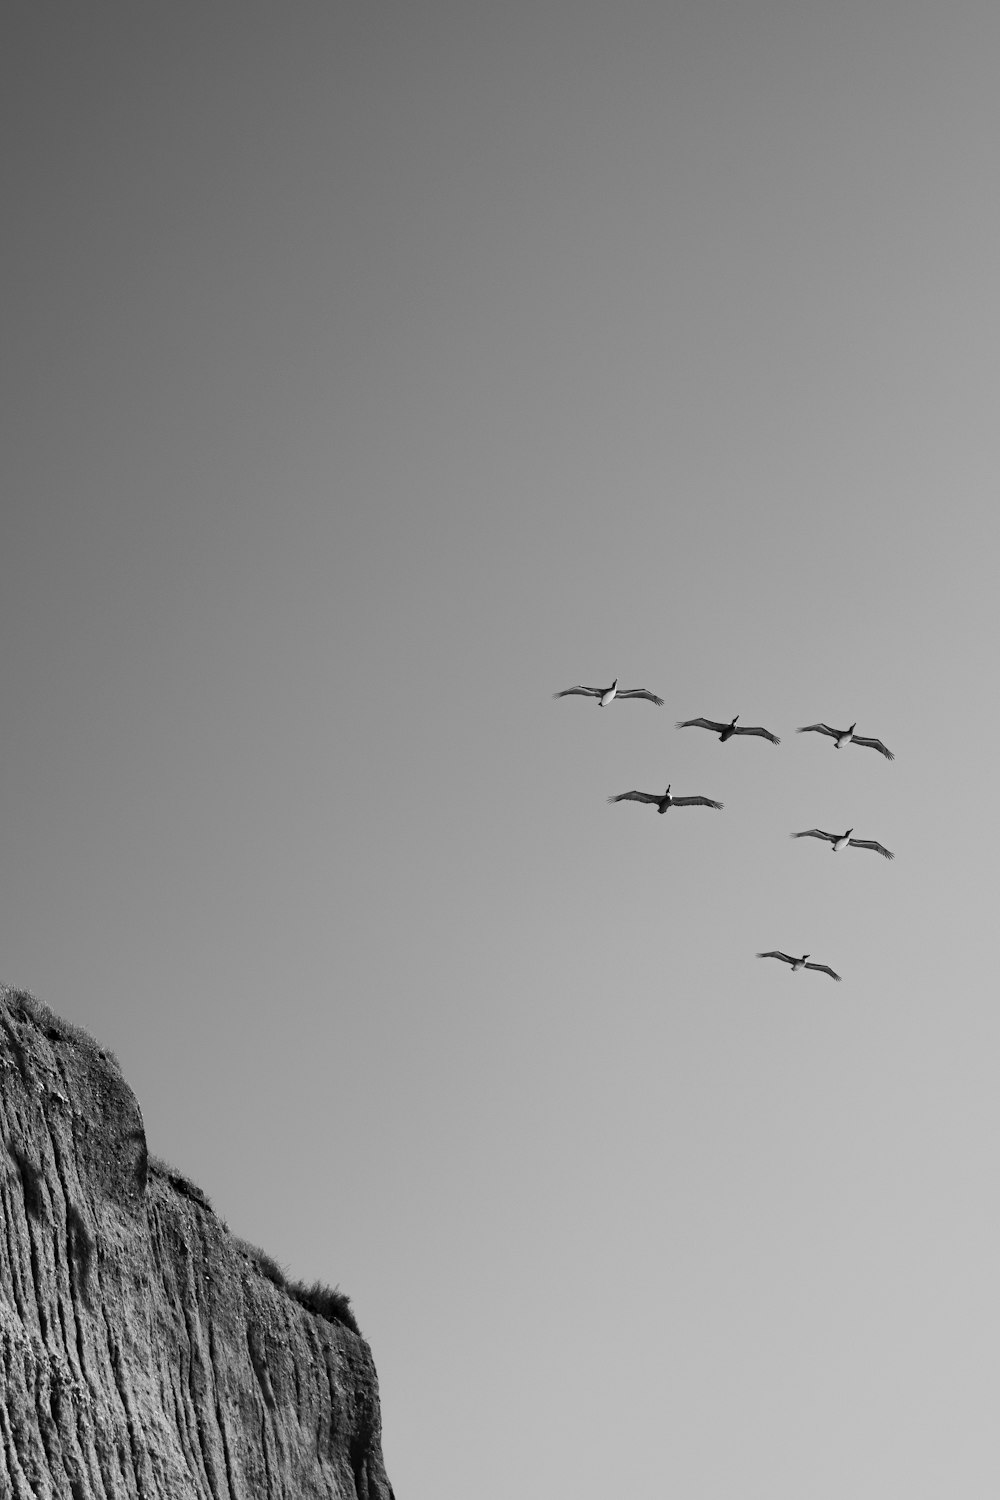 a flock of birds flying over a cliff